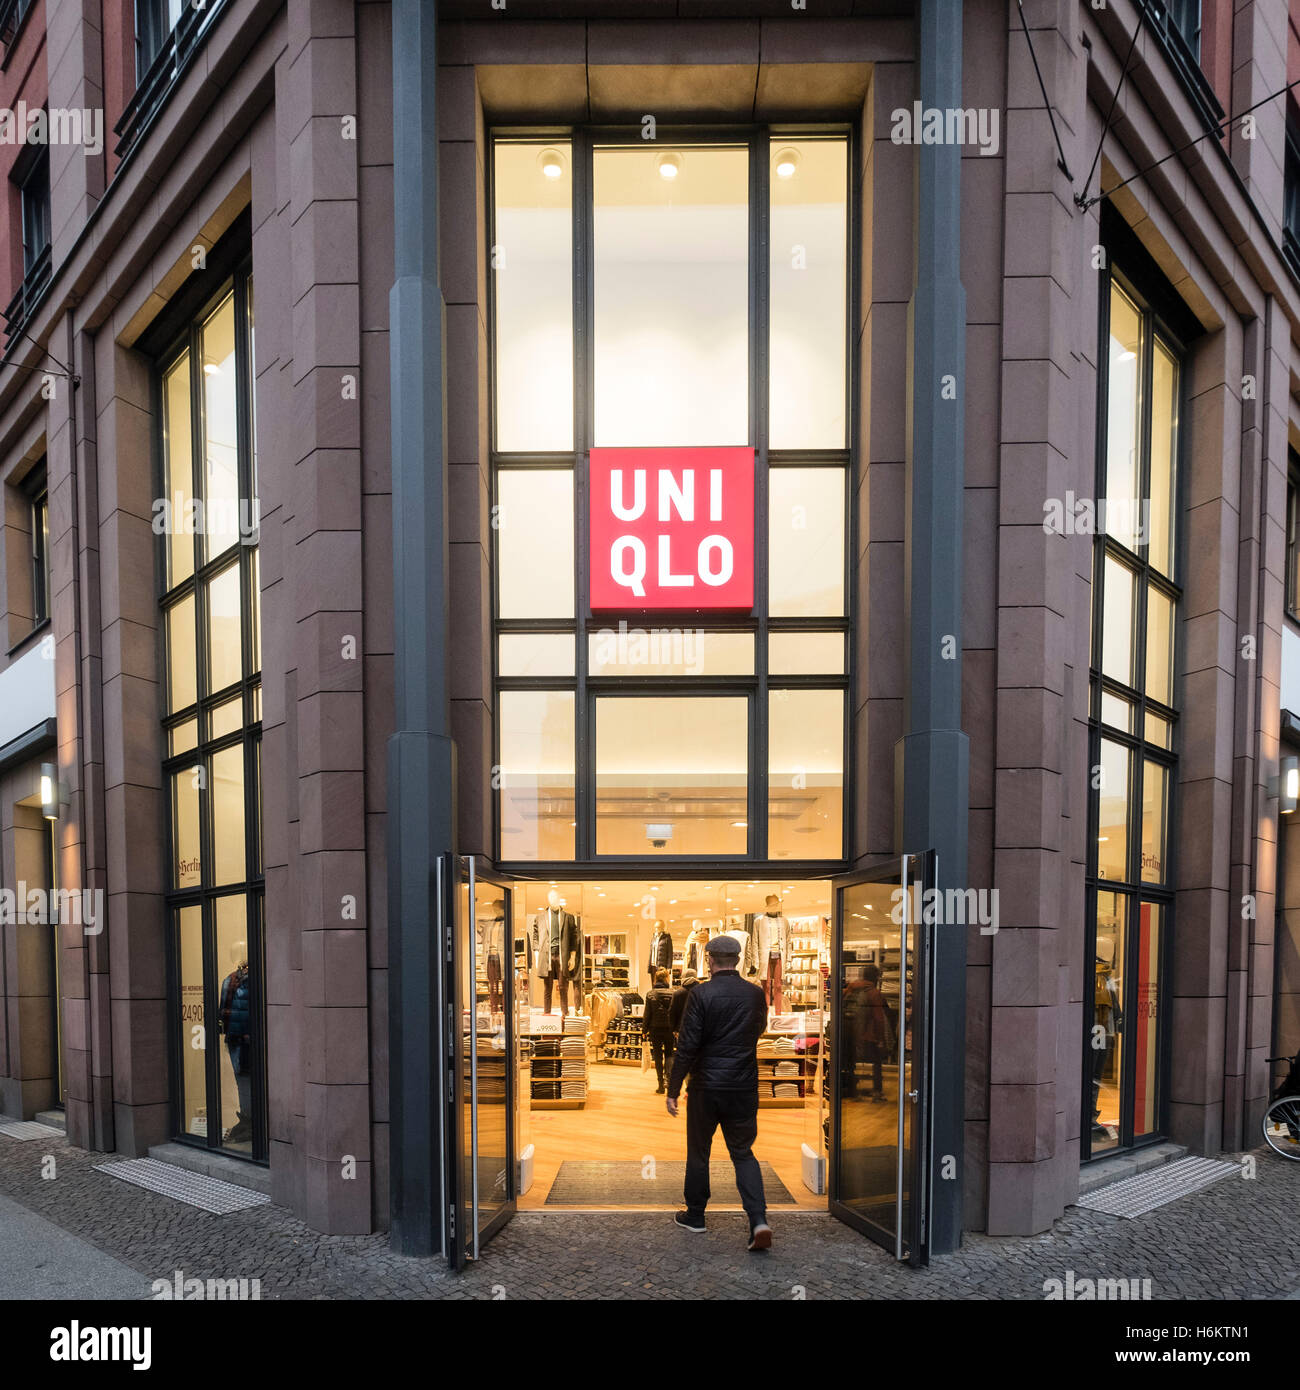 Uniqlo Store Exterior High Resolution Stock Photography and Images - Alamy